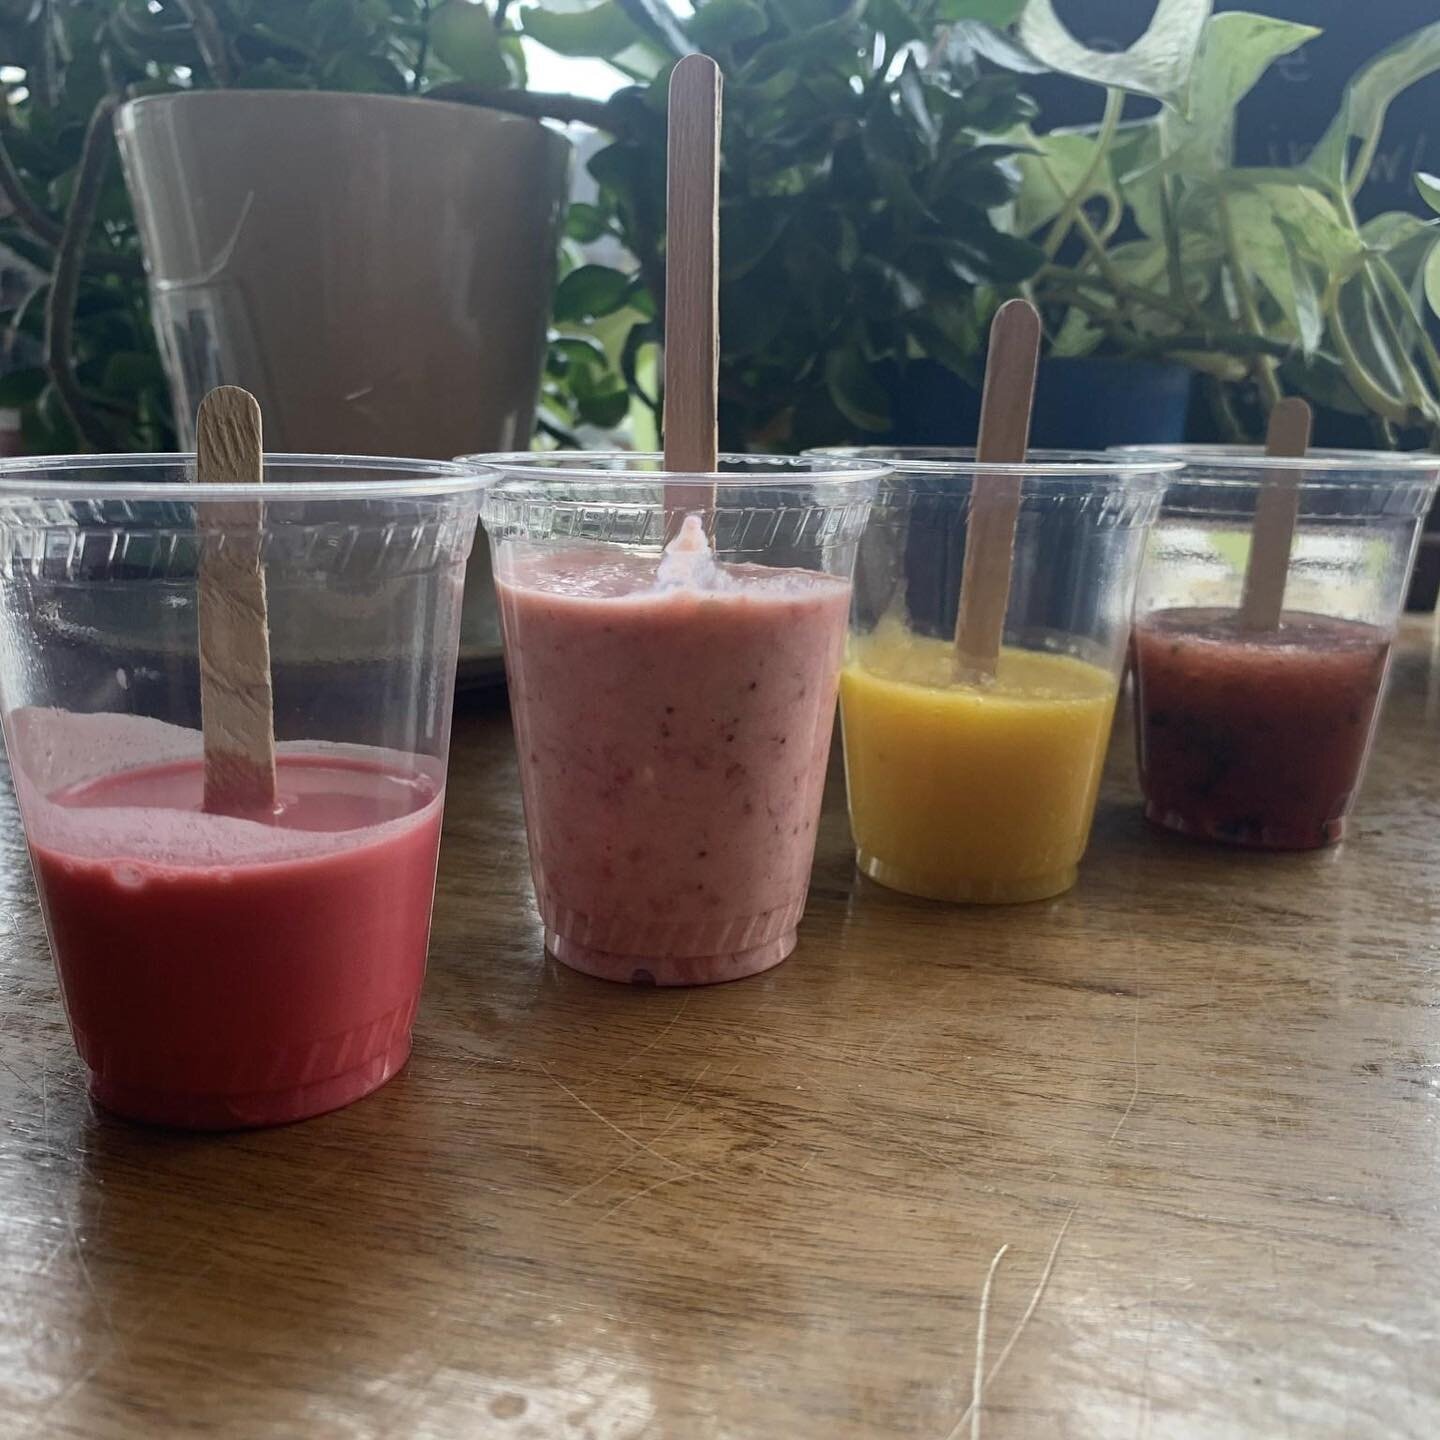 Need some refreshment this afternoon? Come into the Caf&eacute; to try one of our High School volunteer's homemade popsicles! 

Choose from four flavors: Hibiscus Refresher, Strawberry Cheesecake, Mango Lime &amp; Taj&iacute;n, and Watermelon Splash!